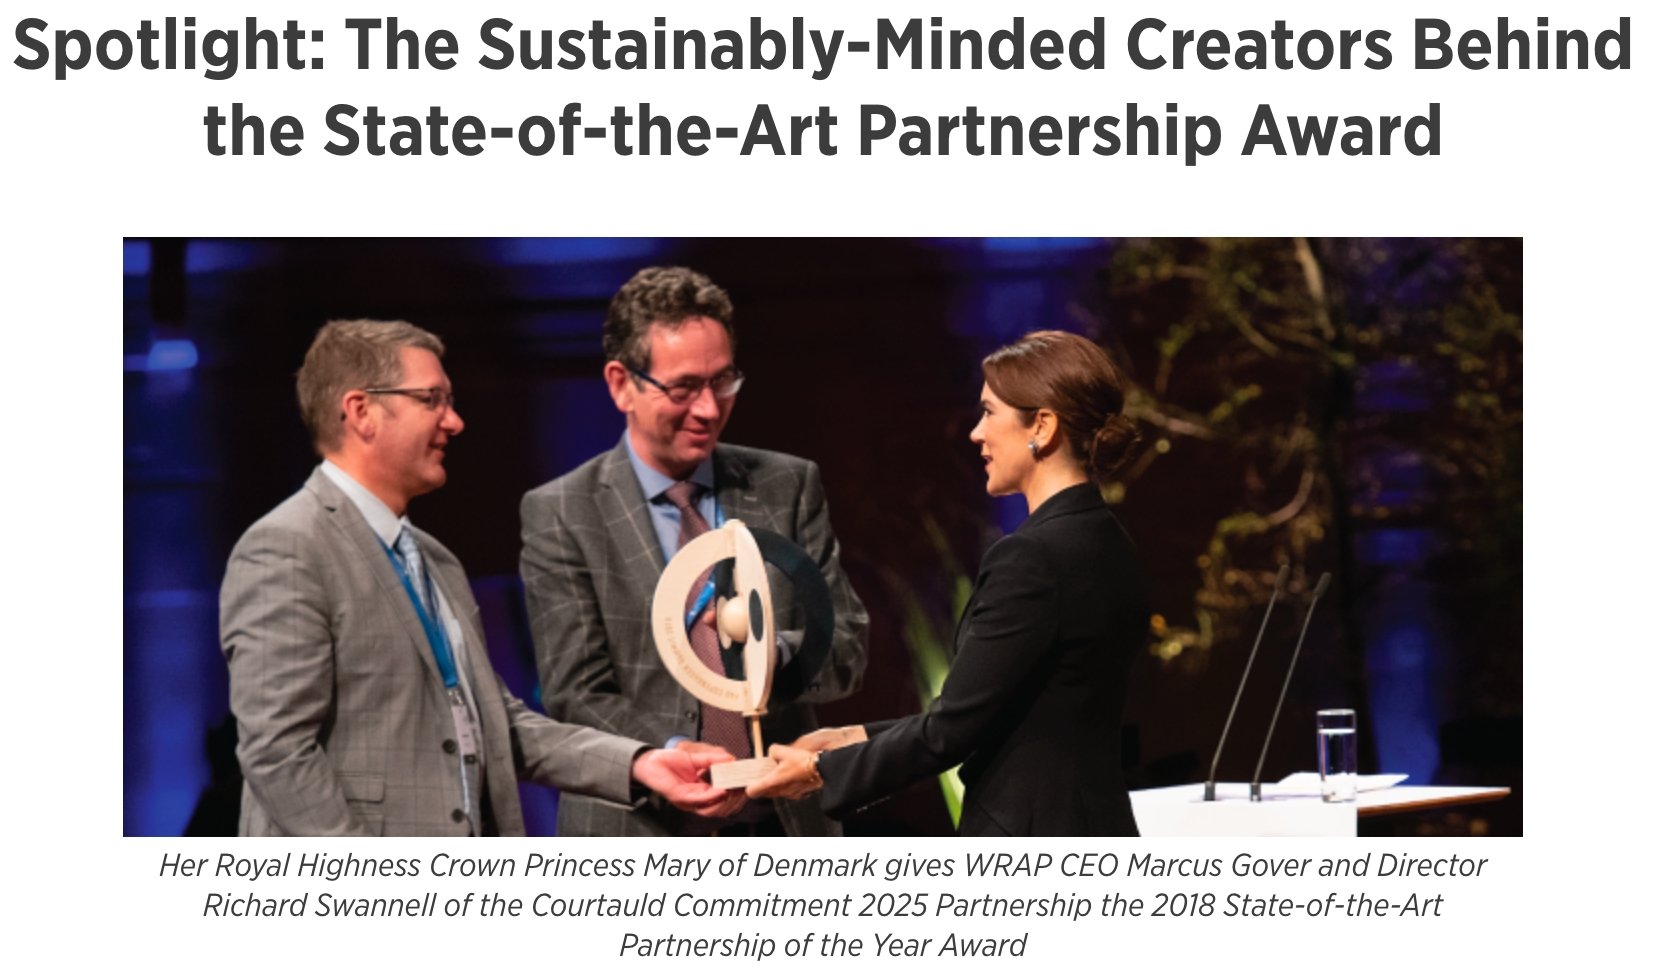 WE ARE: The Sustainably-Minded Creators Behind the State-of-the-Art Partnership Award - KOLEKTO